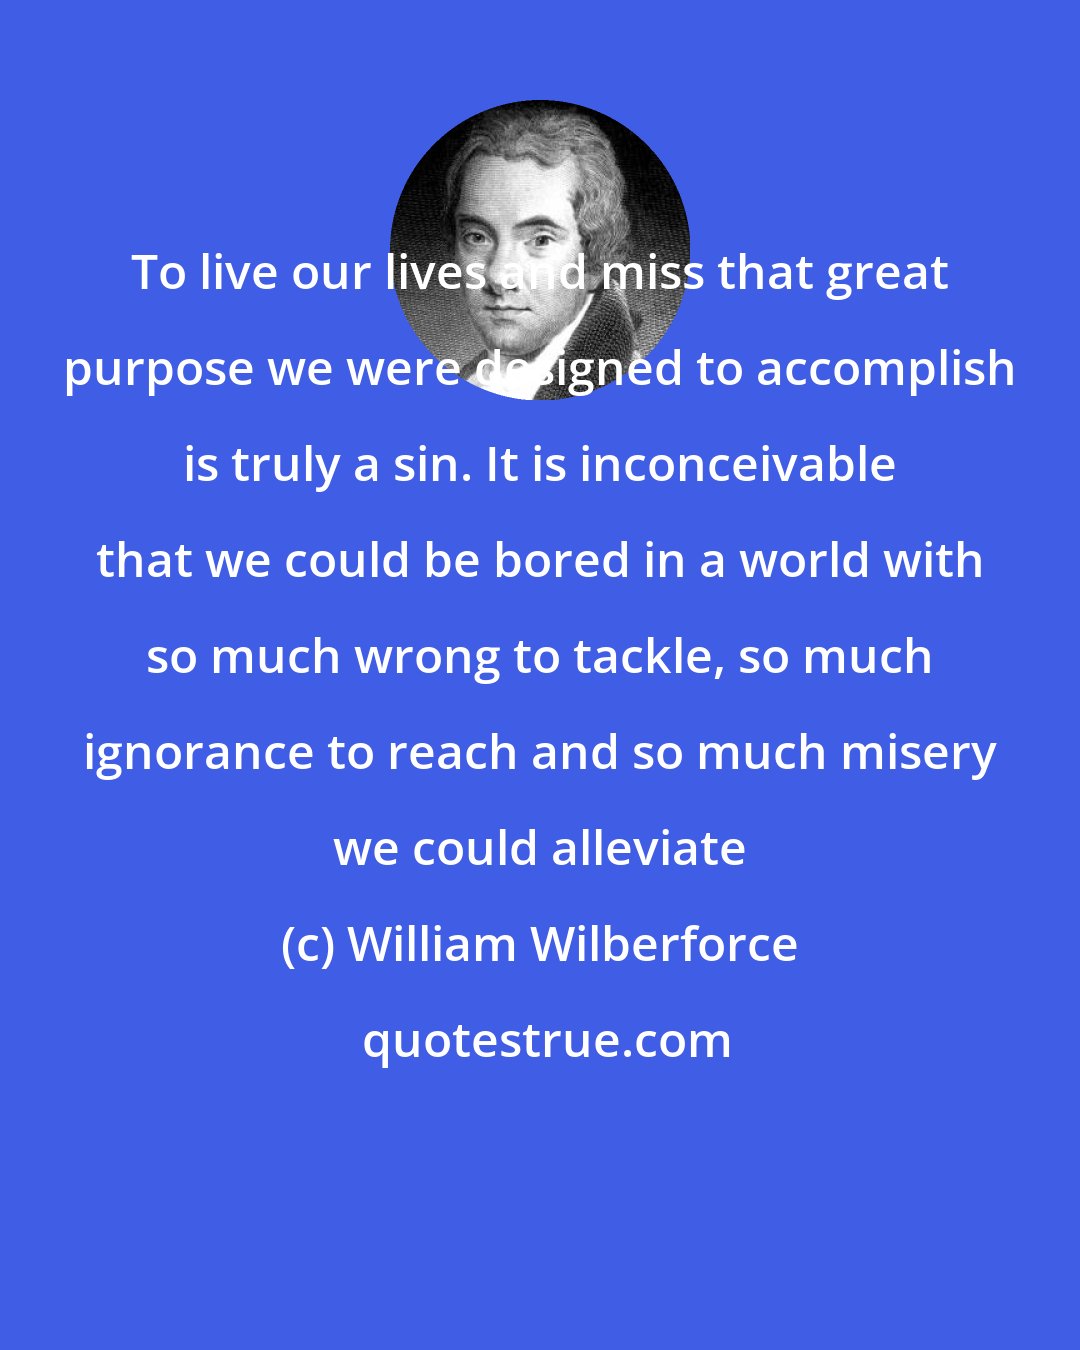 William Wilberforce: To live our lives and miss that great purpose we were designed to accomplish is truly a sin. It is inconceivable that we could be bored in a world with so much wrong to tackle, so much ignorance to reach and so much misery we could alleviate